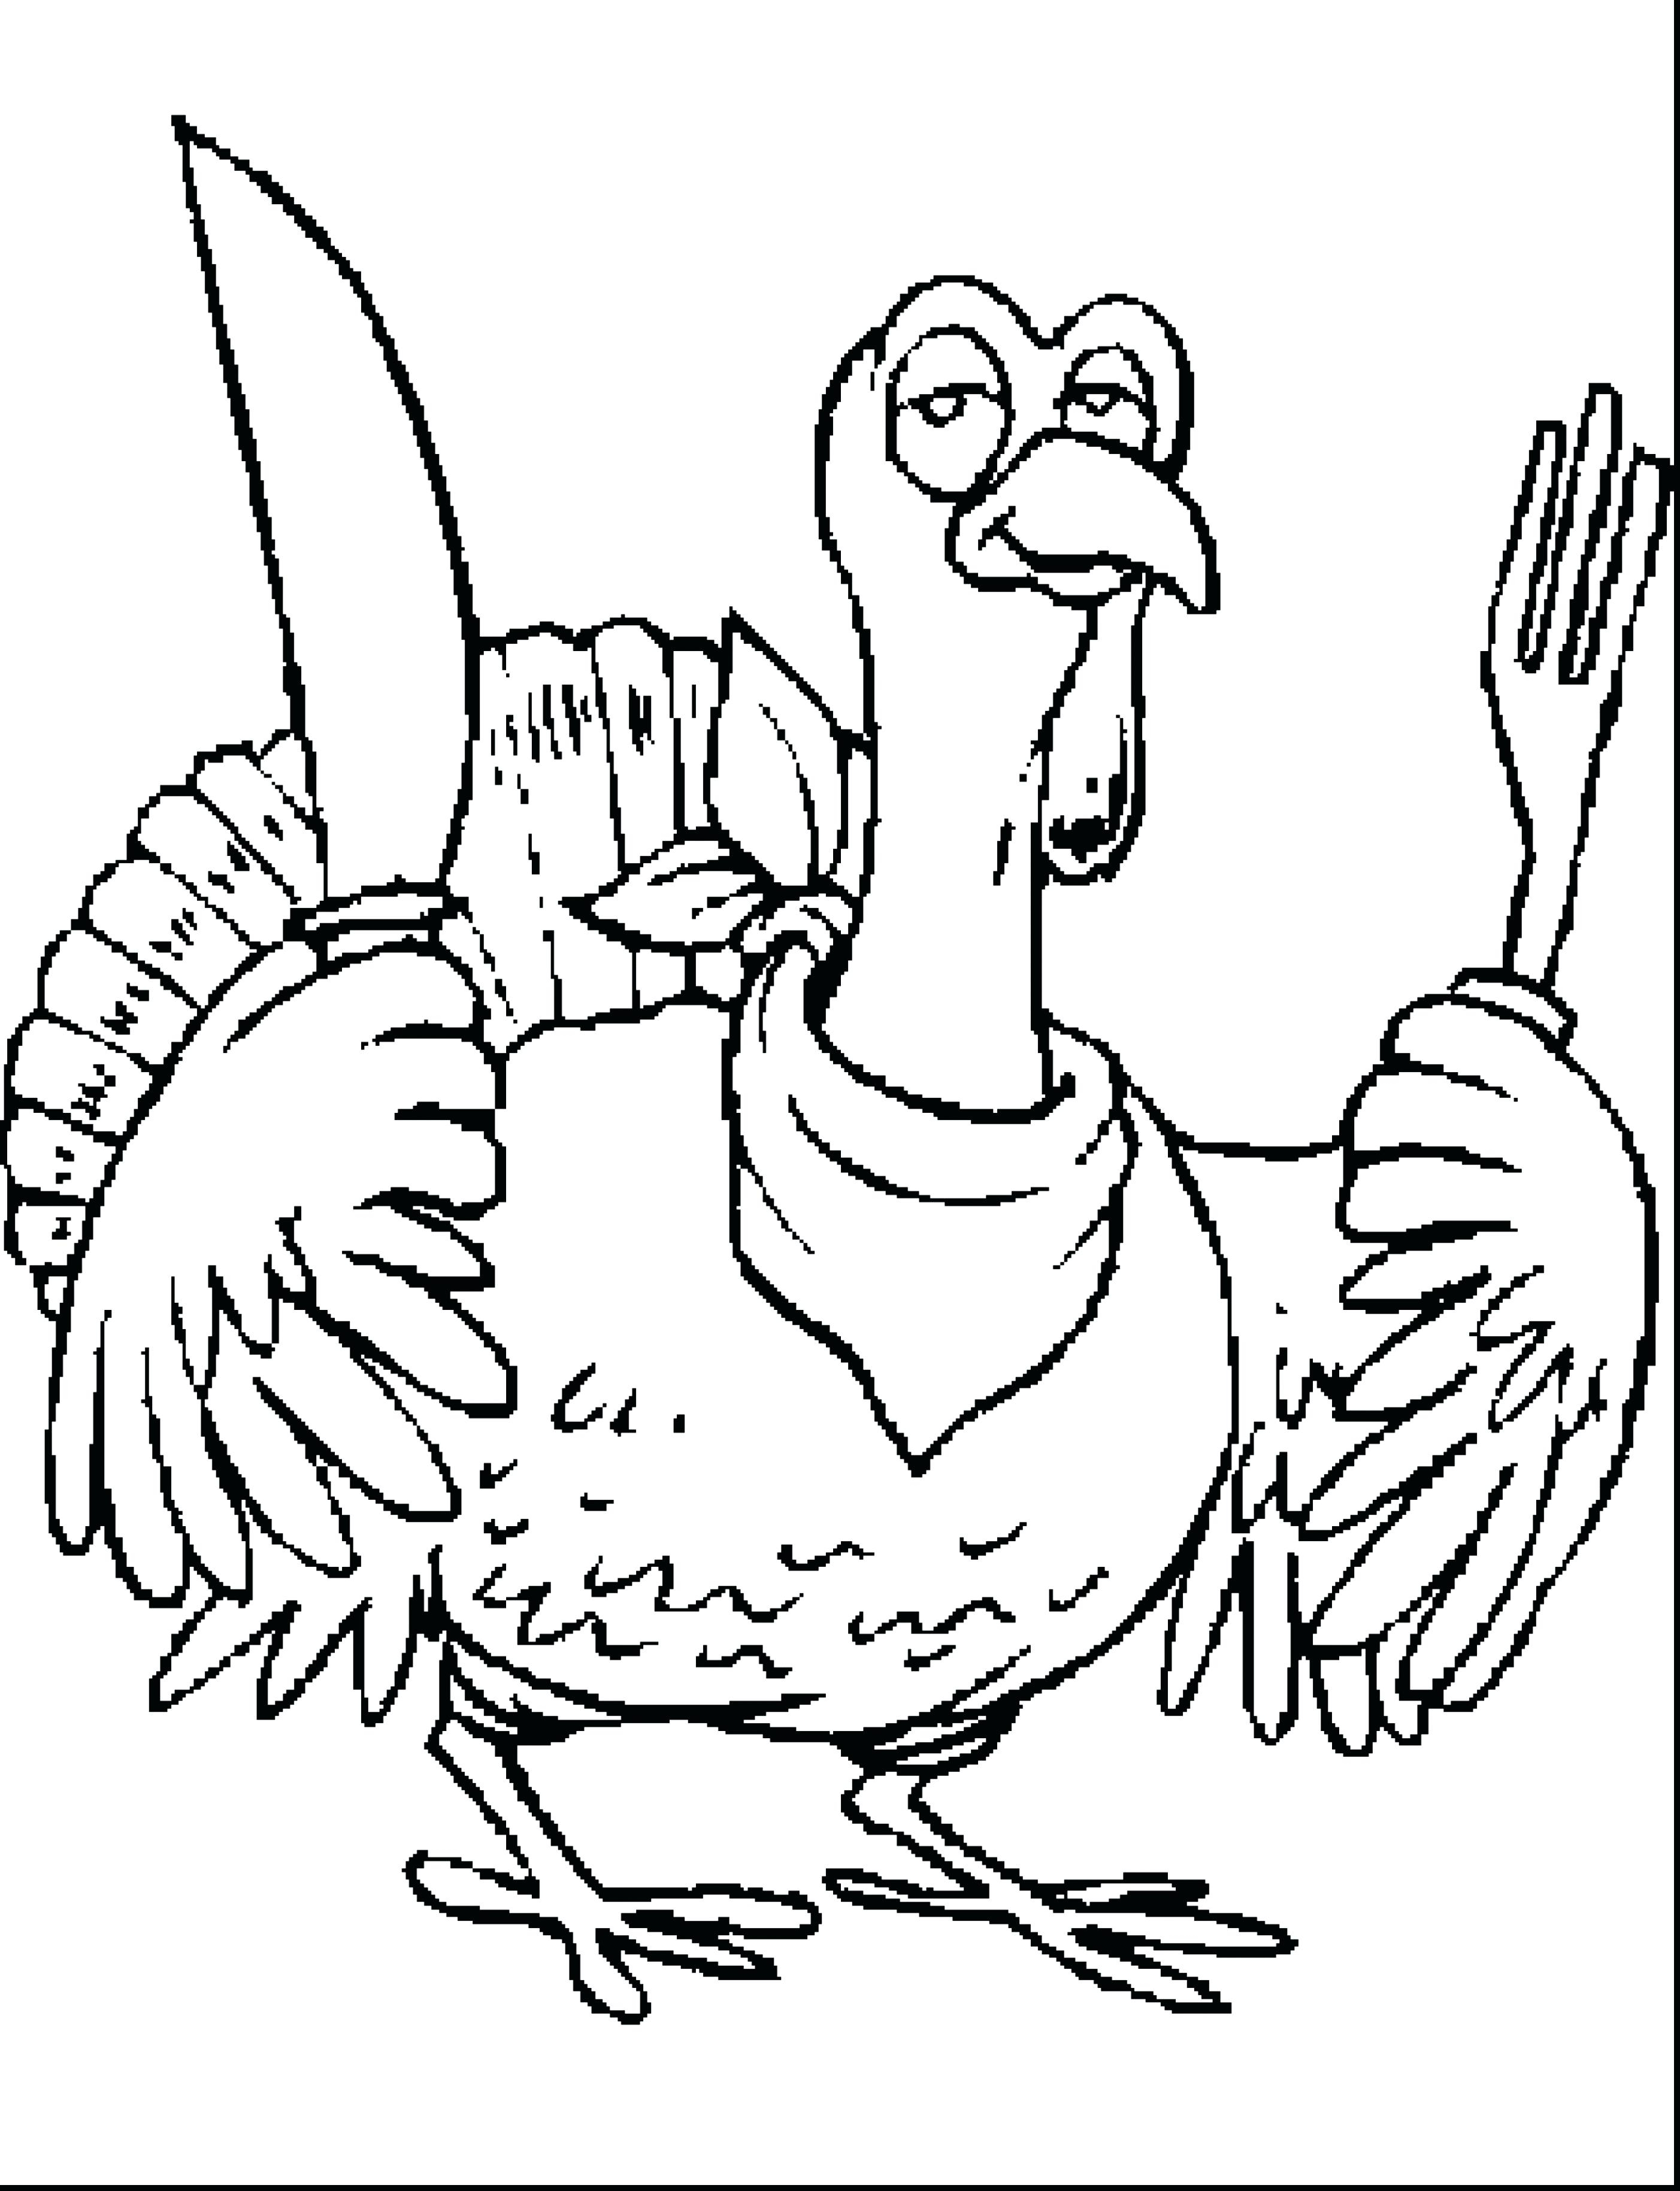 Word Search Coloring Pages To Print Print Turkey Coloring Pages Wholenewlevelco